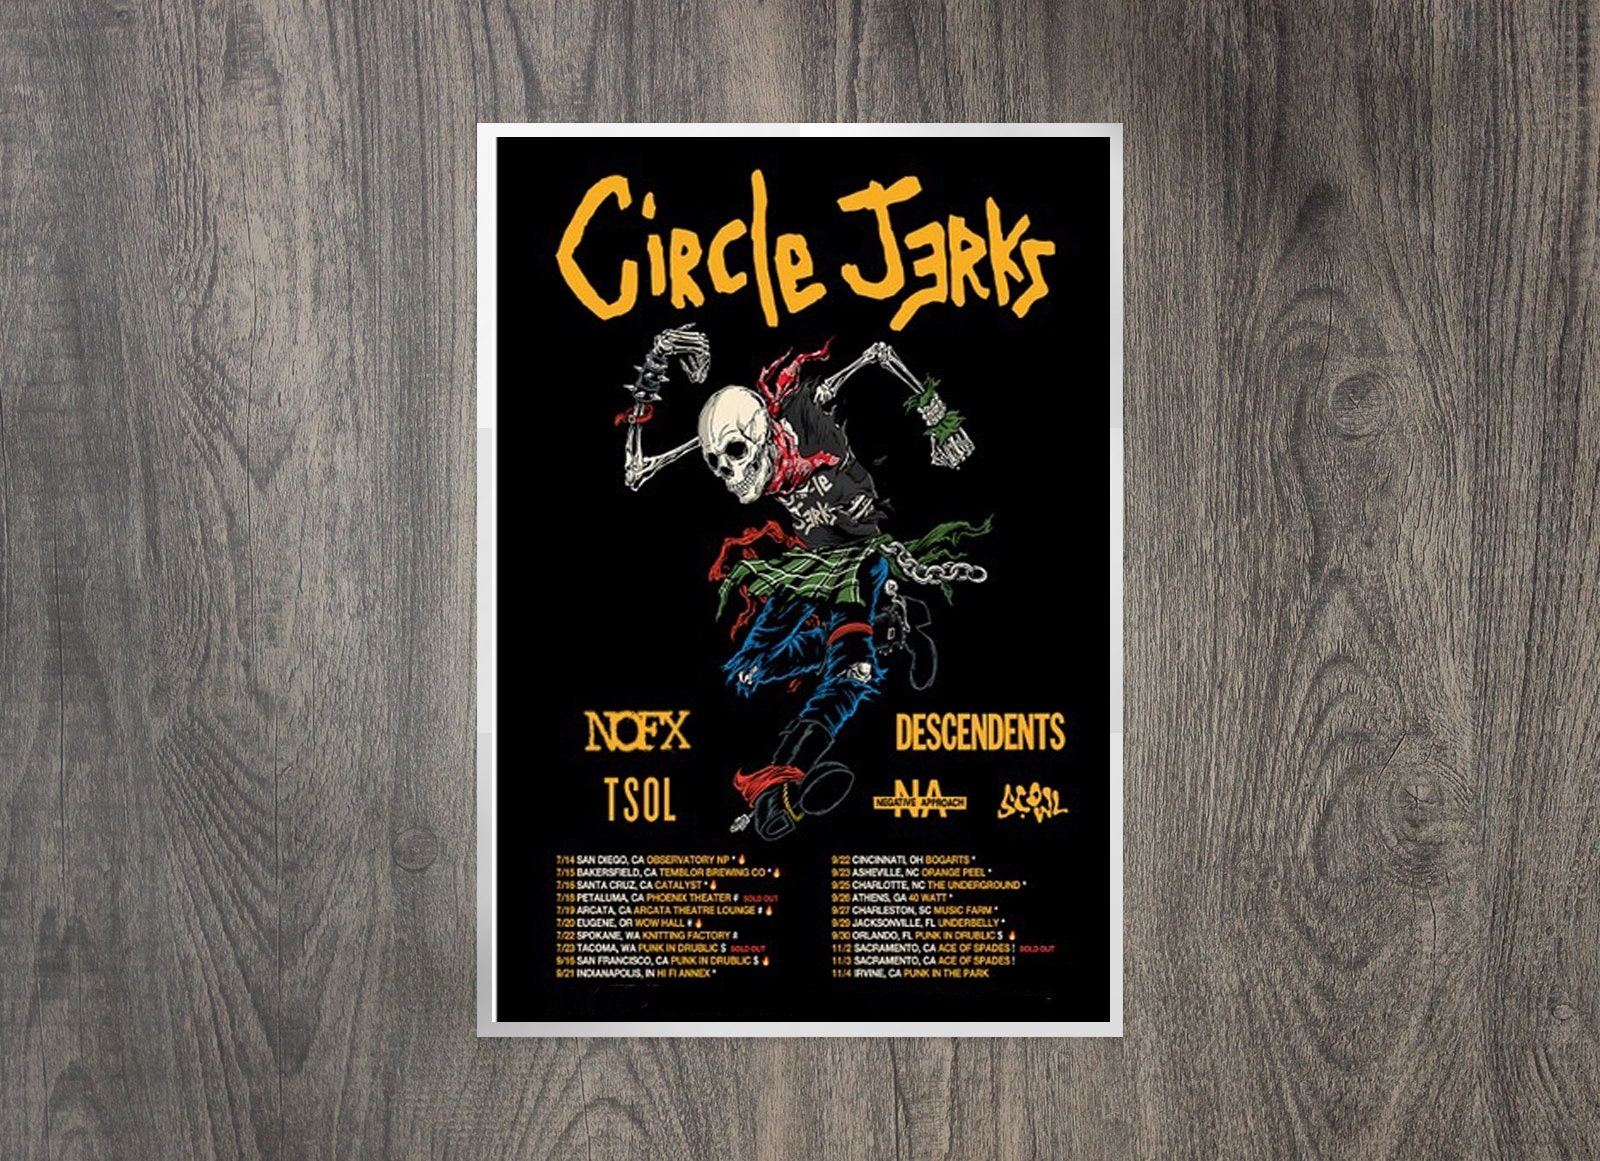 Circle Jerks' iconic 'Skank Man' is now an action figure